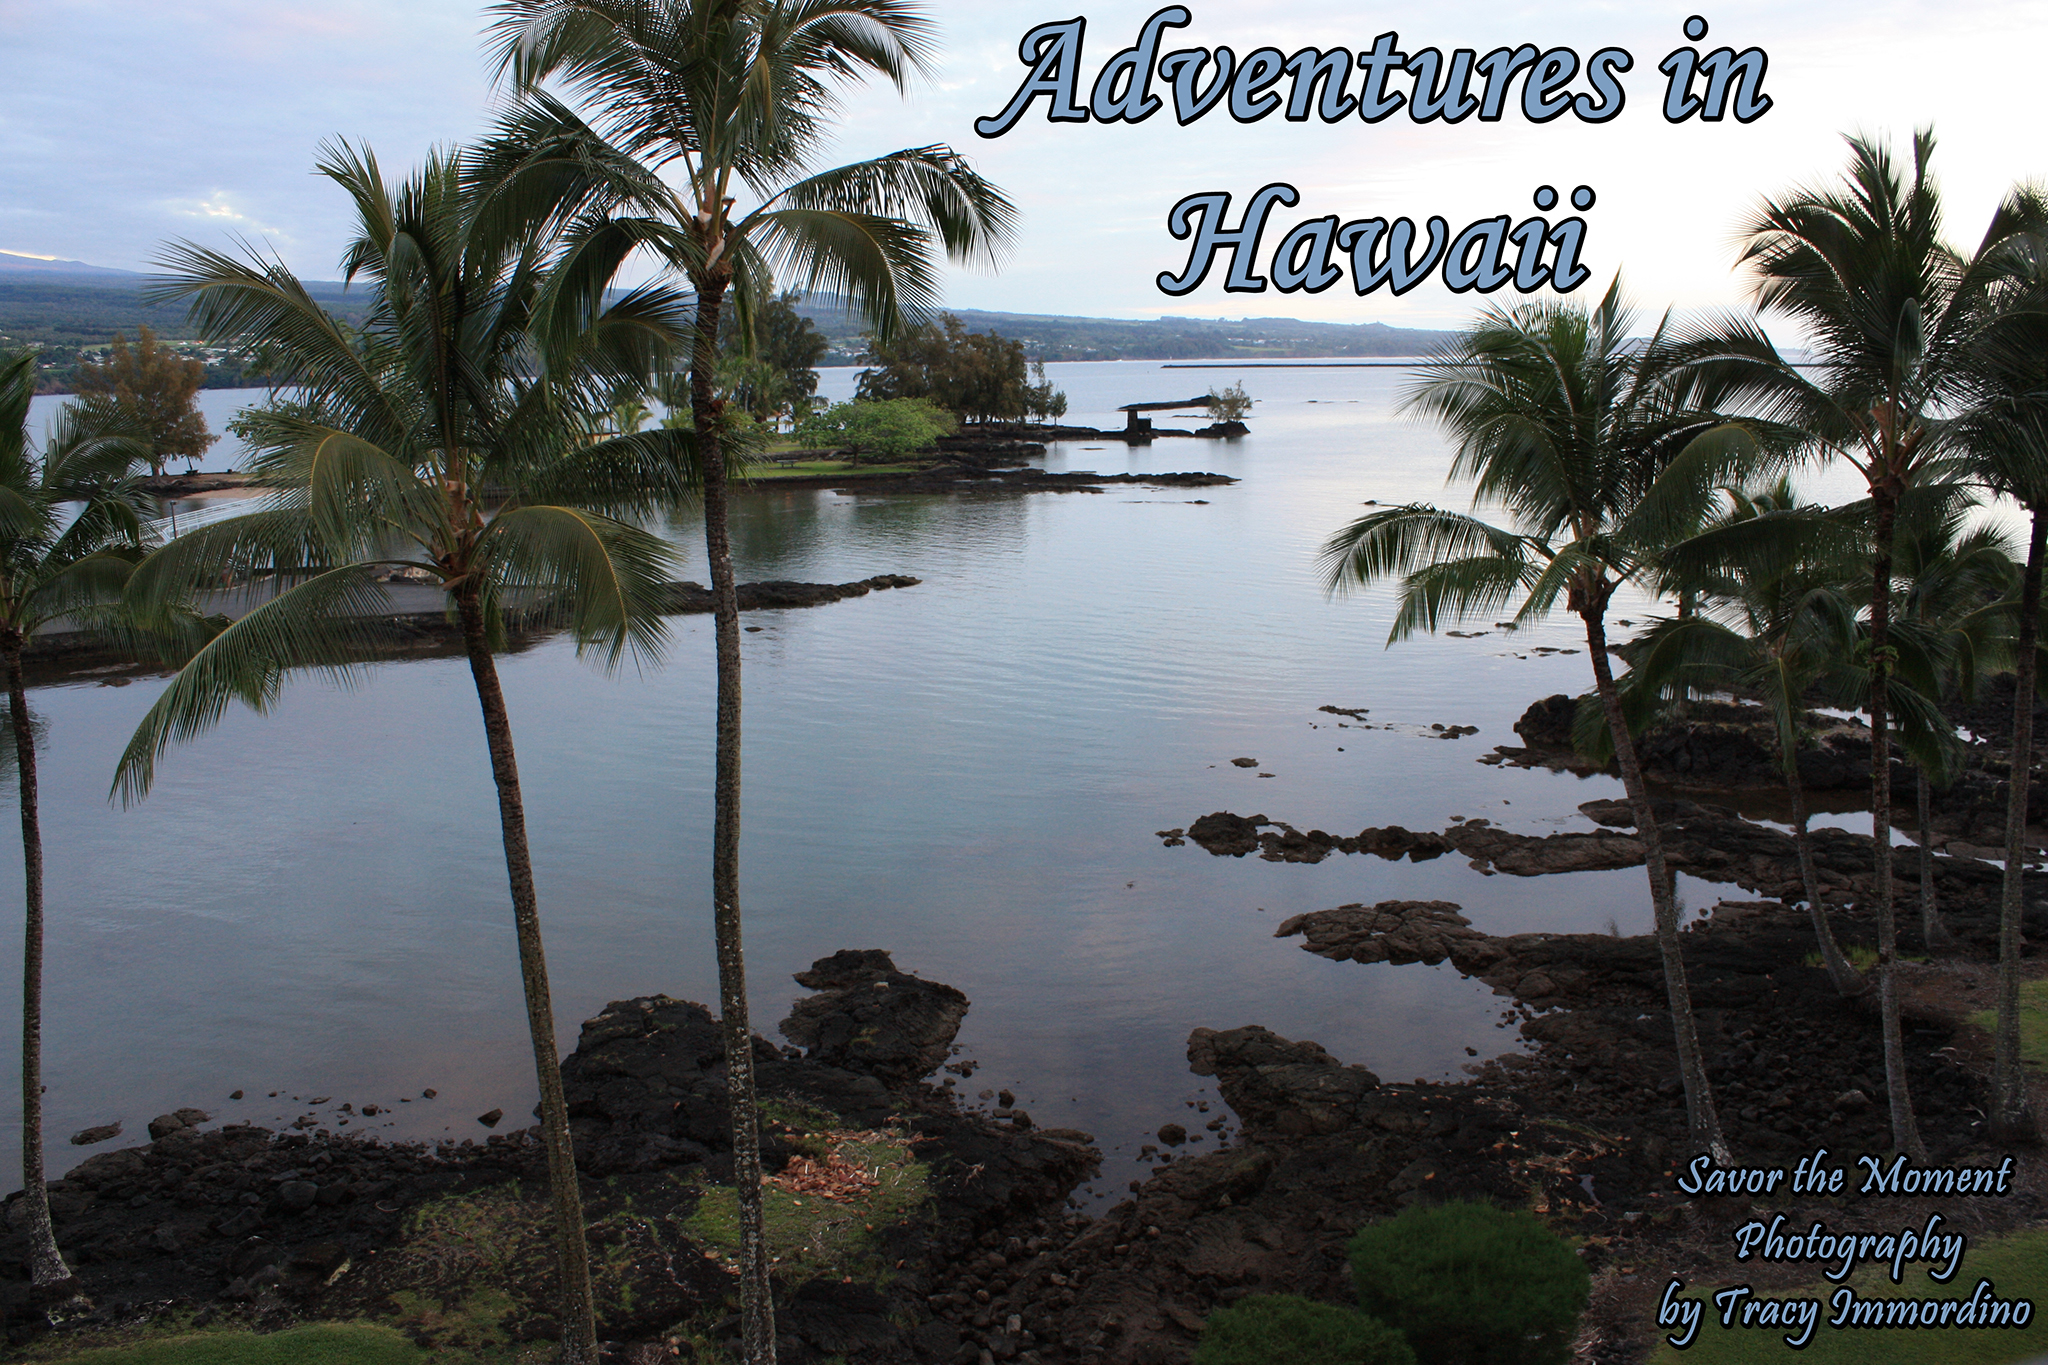 View from Castle Hilo in Hawaii